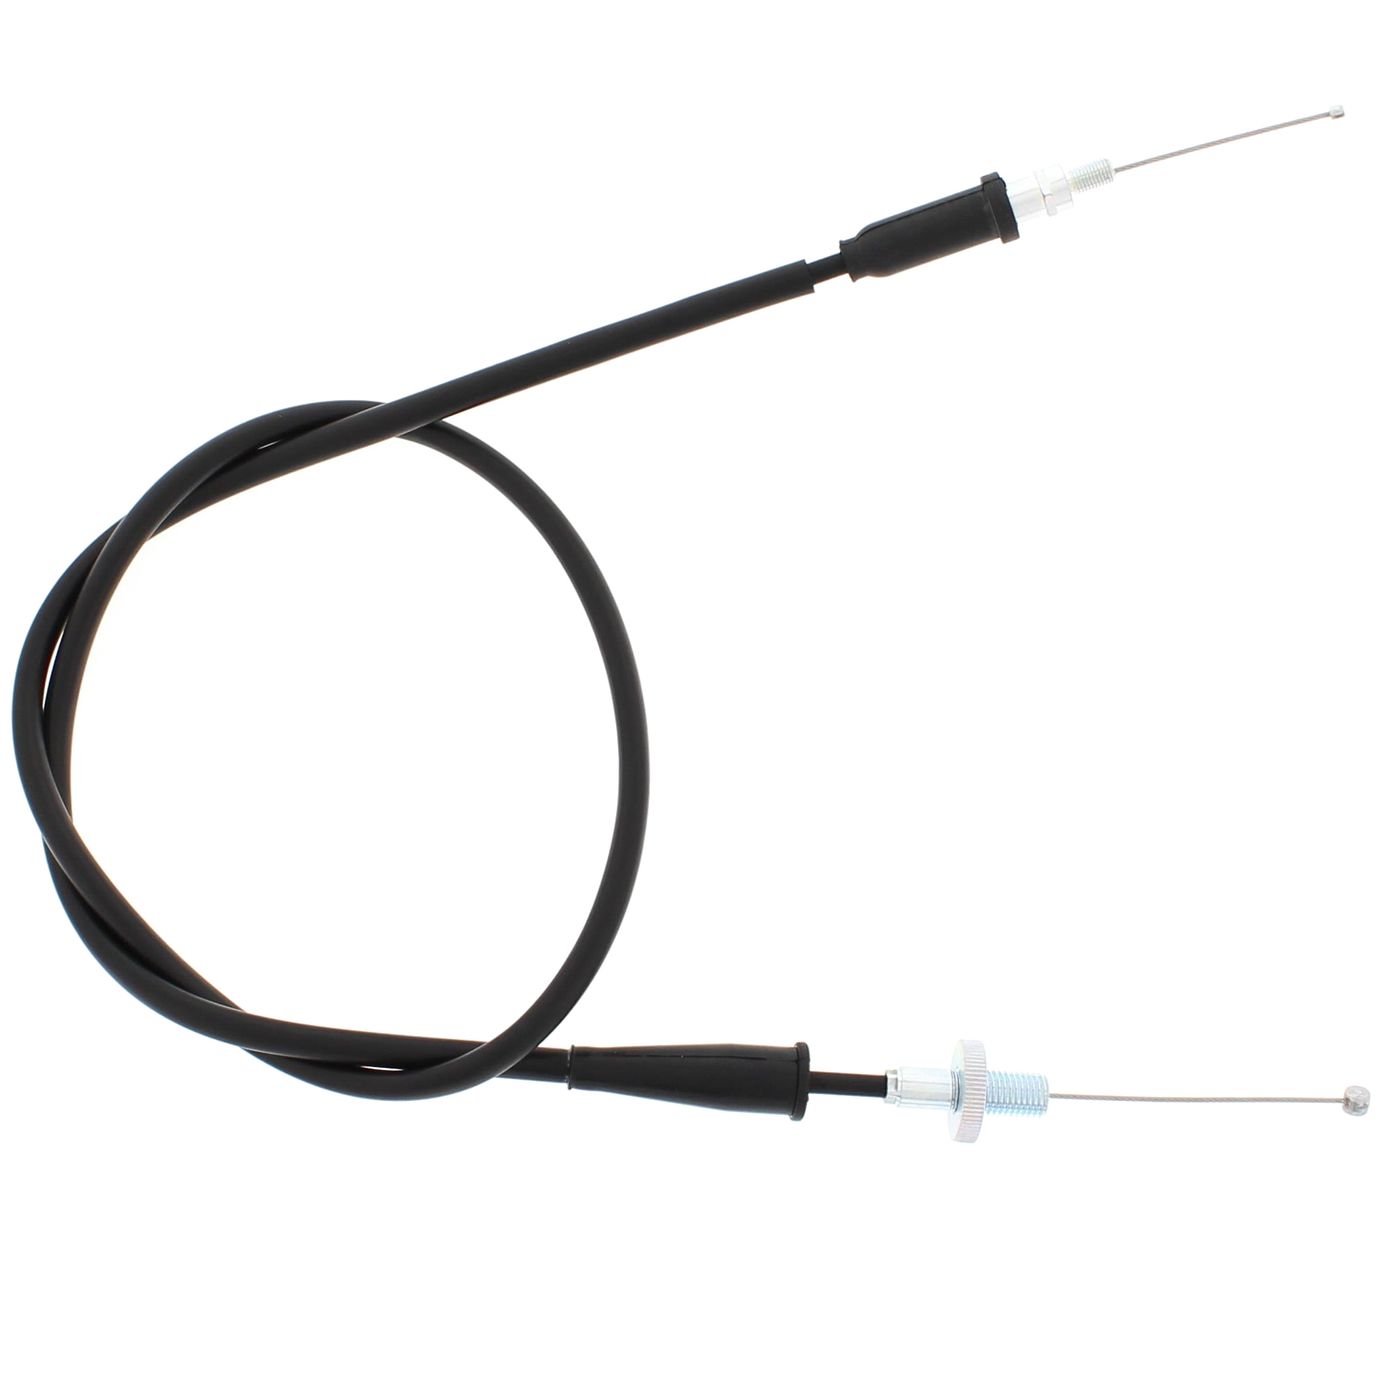 Wrp Throttle Cables - WRP451046 image